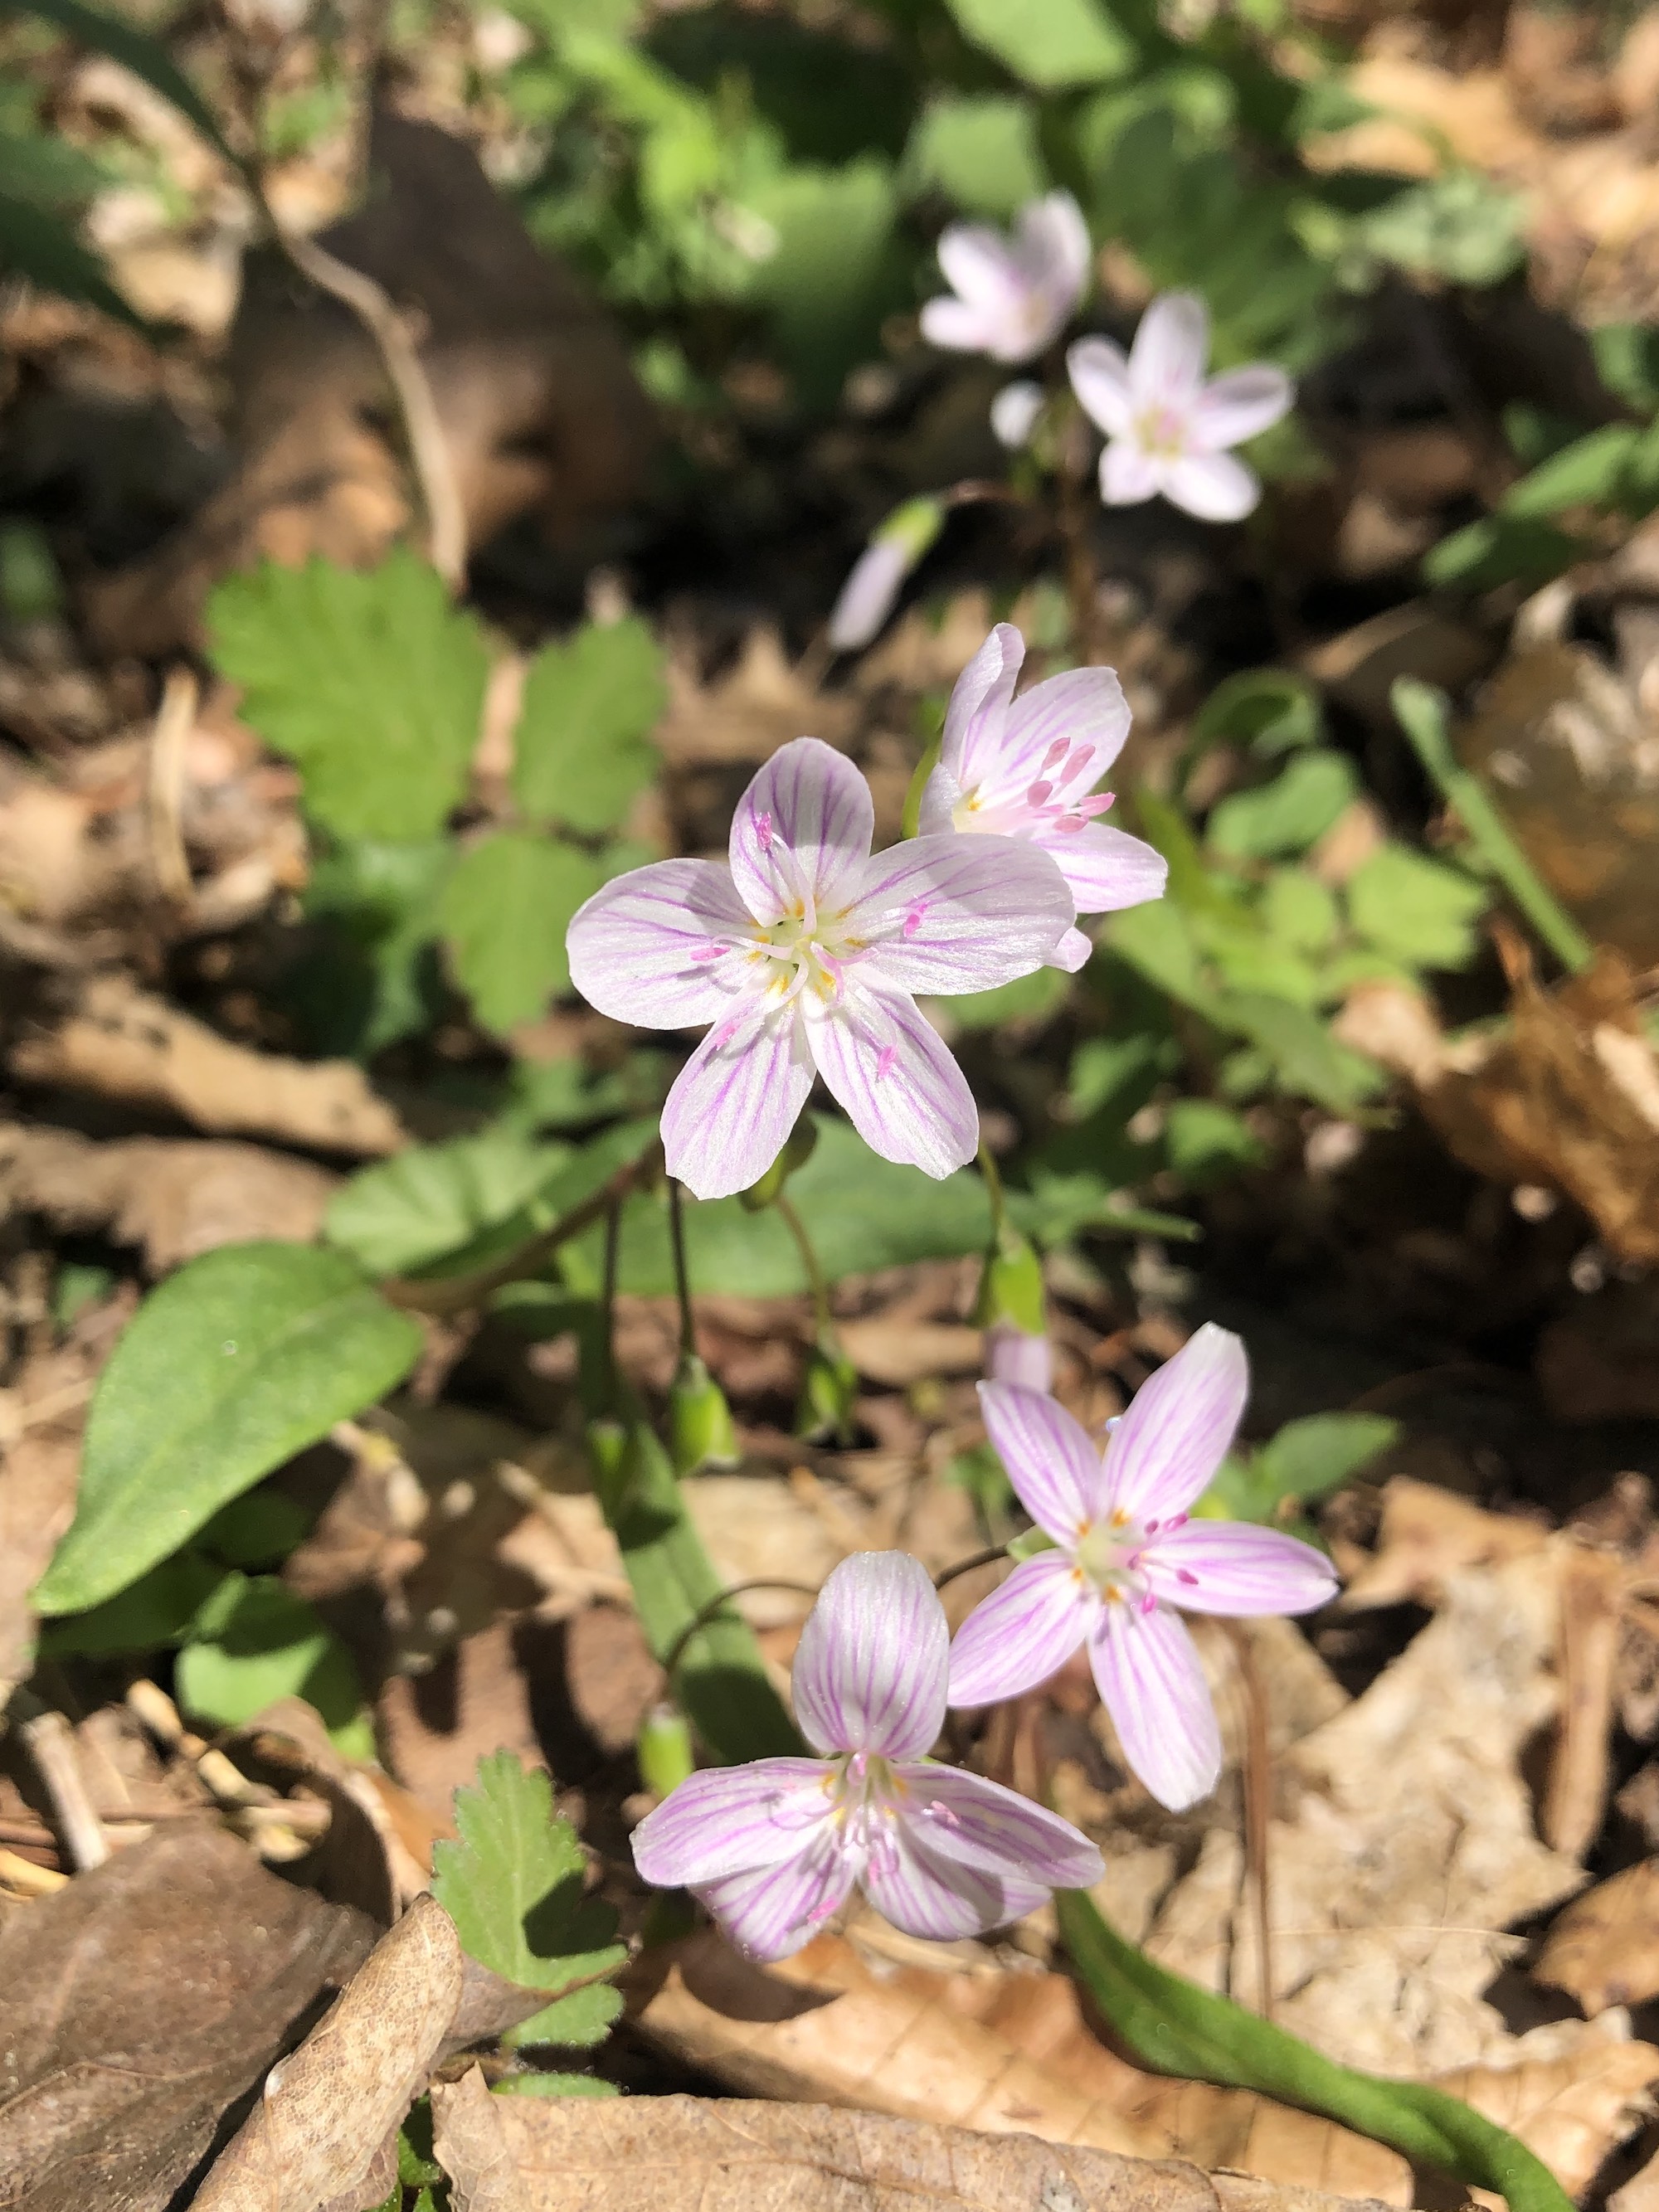 Springbeauty in the Maple-Basswood Forest of the University of Wisconsin Arboretum in Madison, Wisconsin on April 30, 2021.